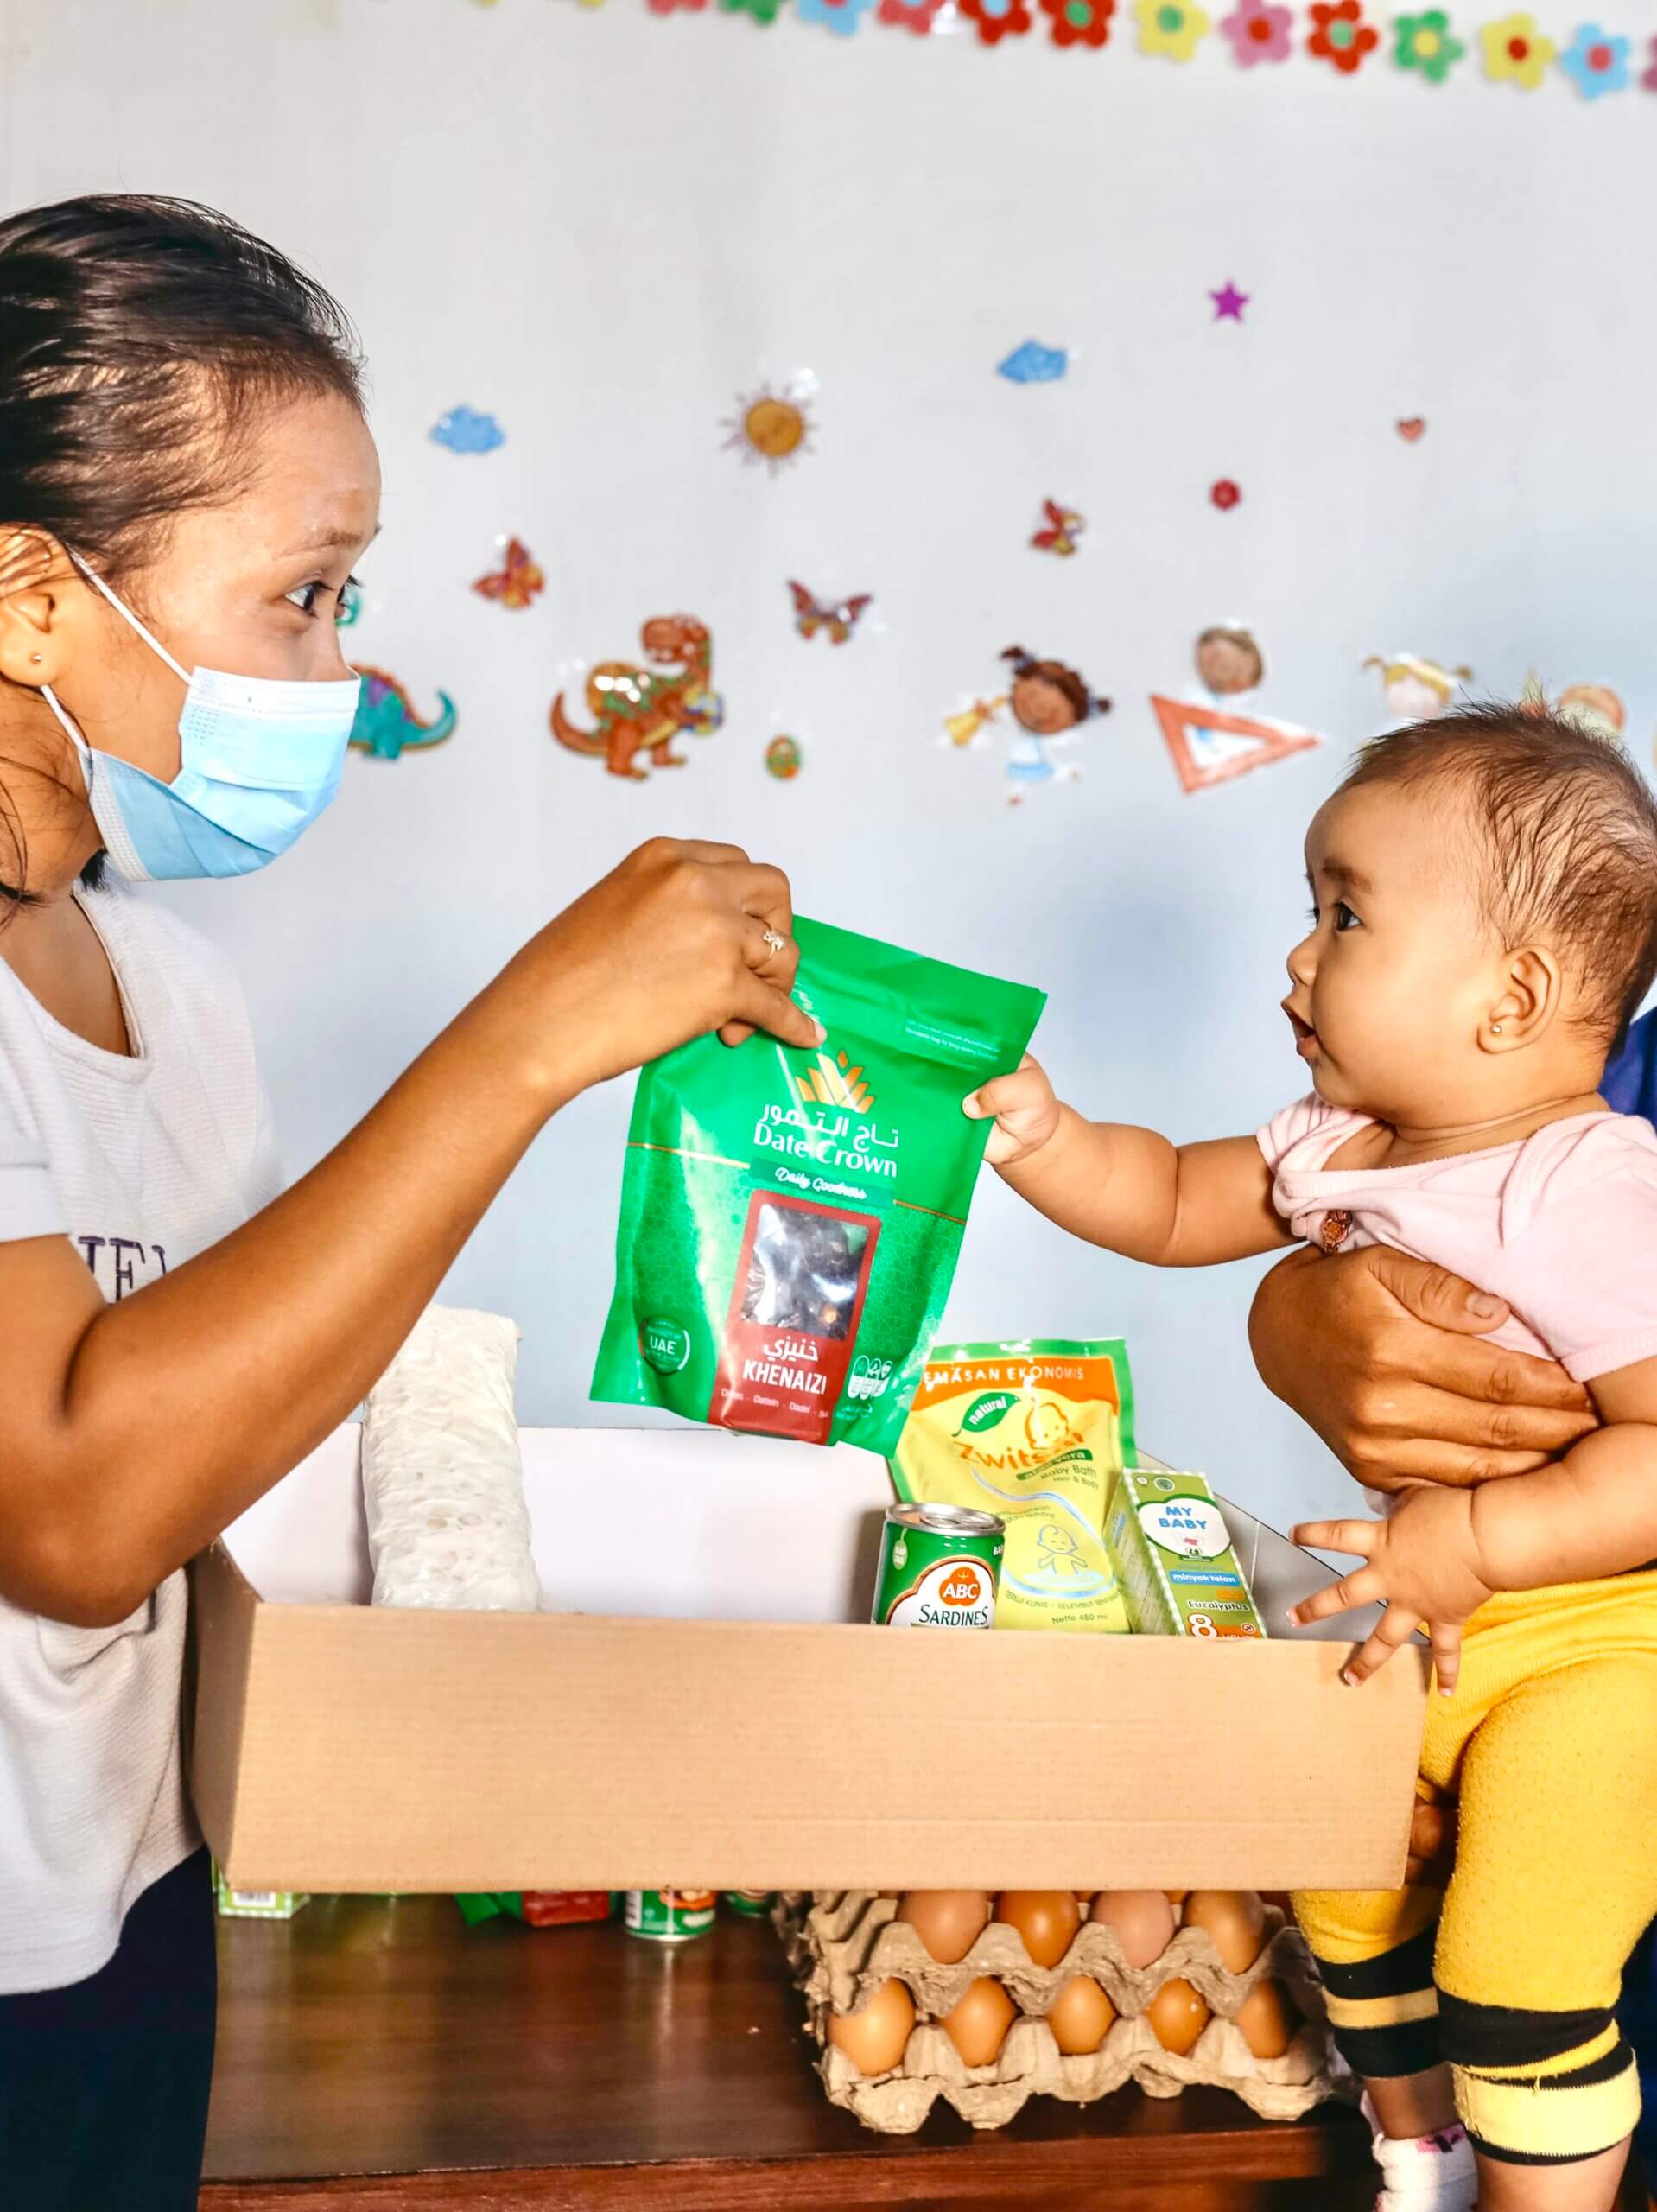 A charity worker gives a woman and her baby a package of food